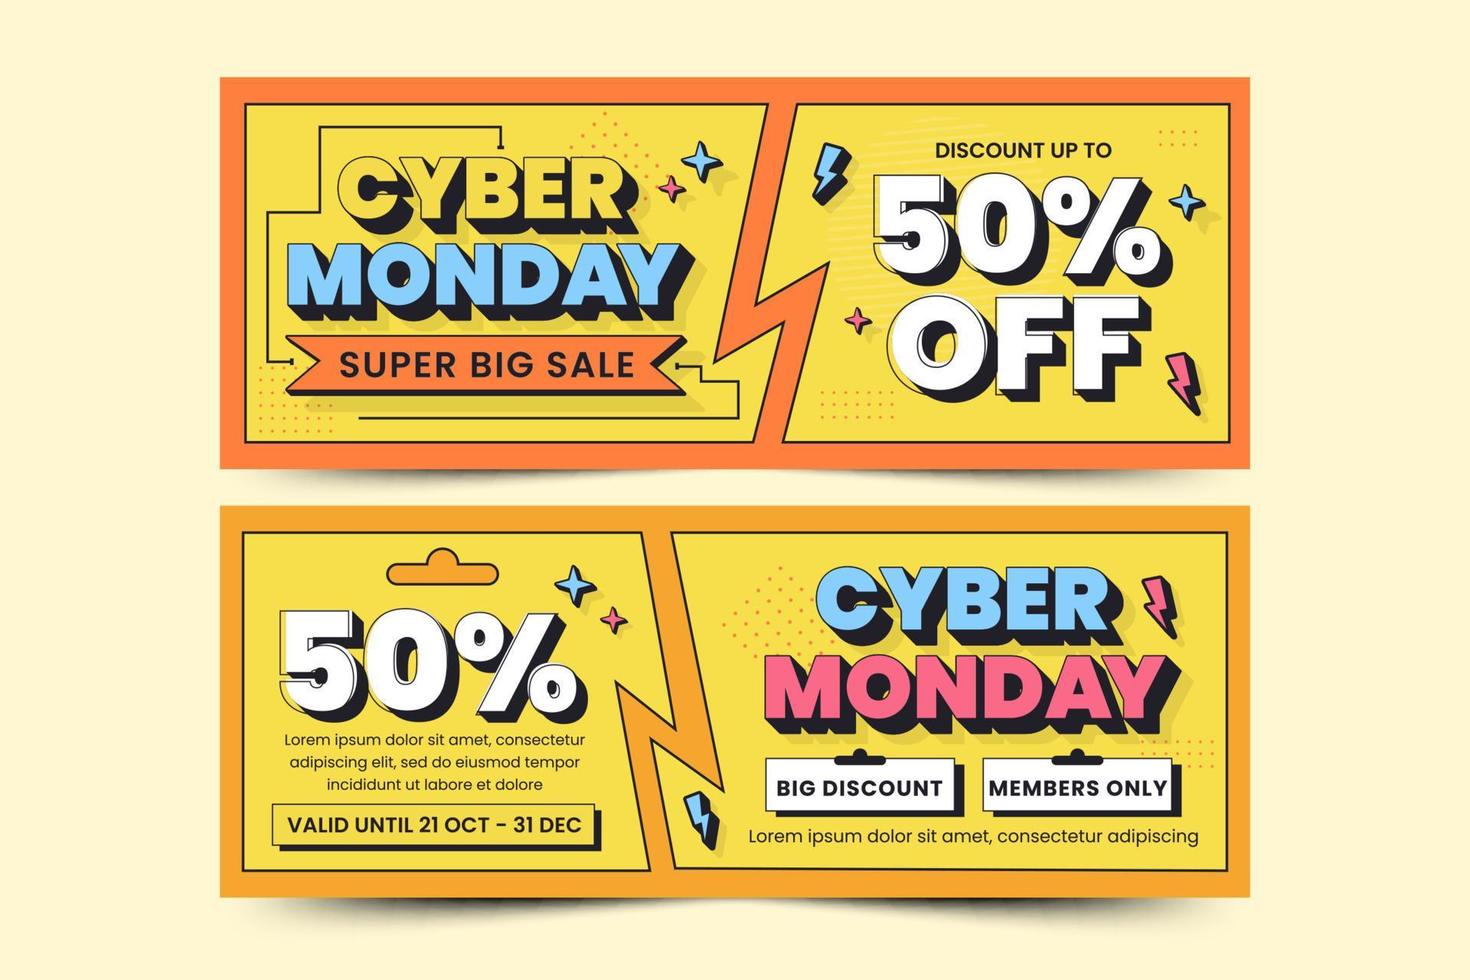 Cyber Monday cover banner design template is easy to customize vector